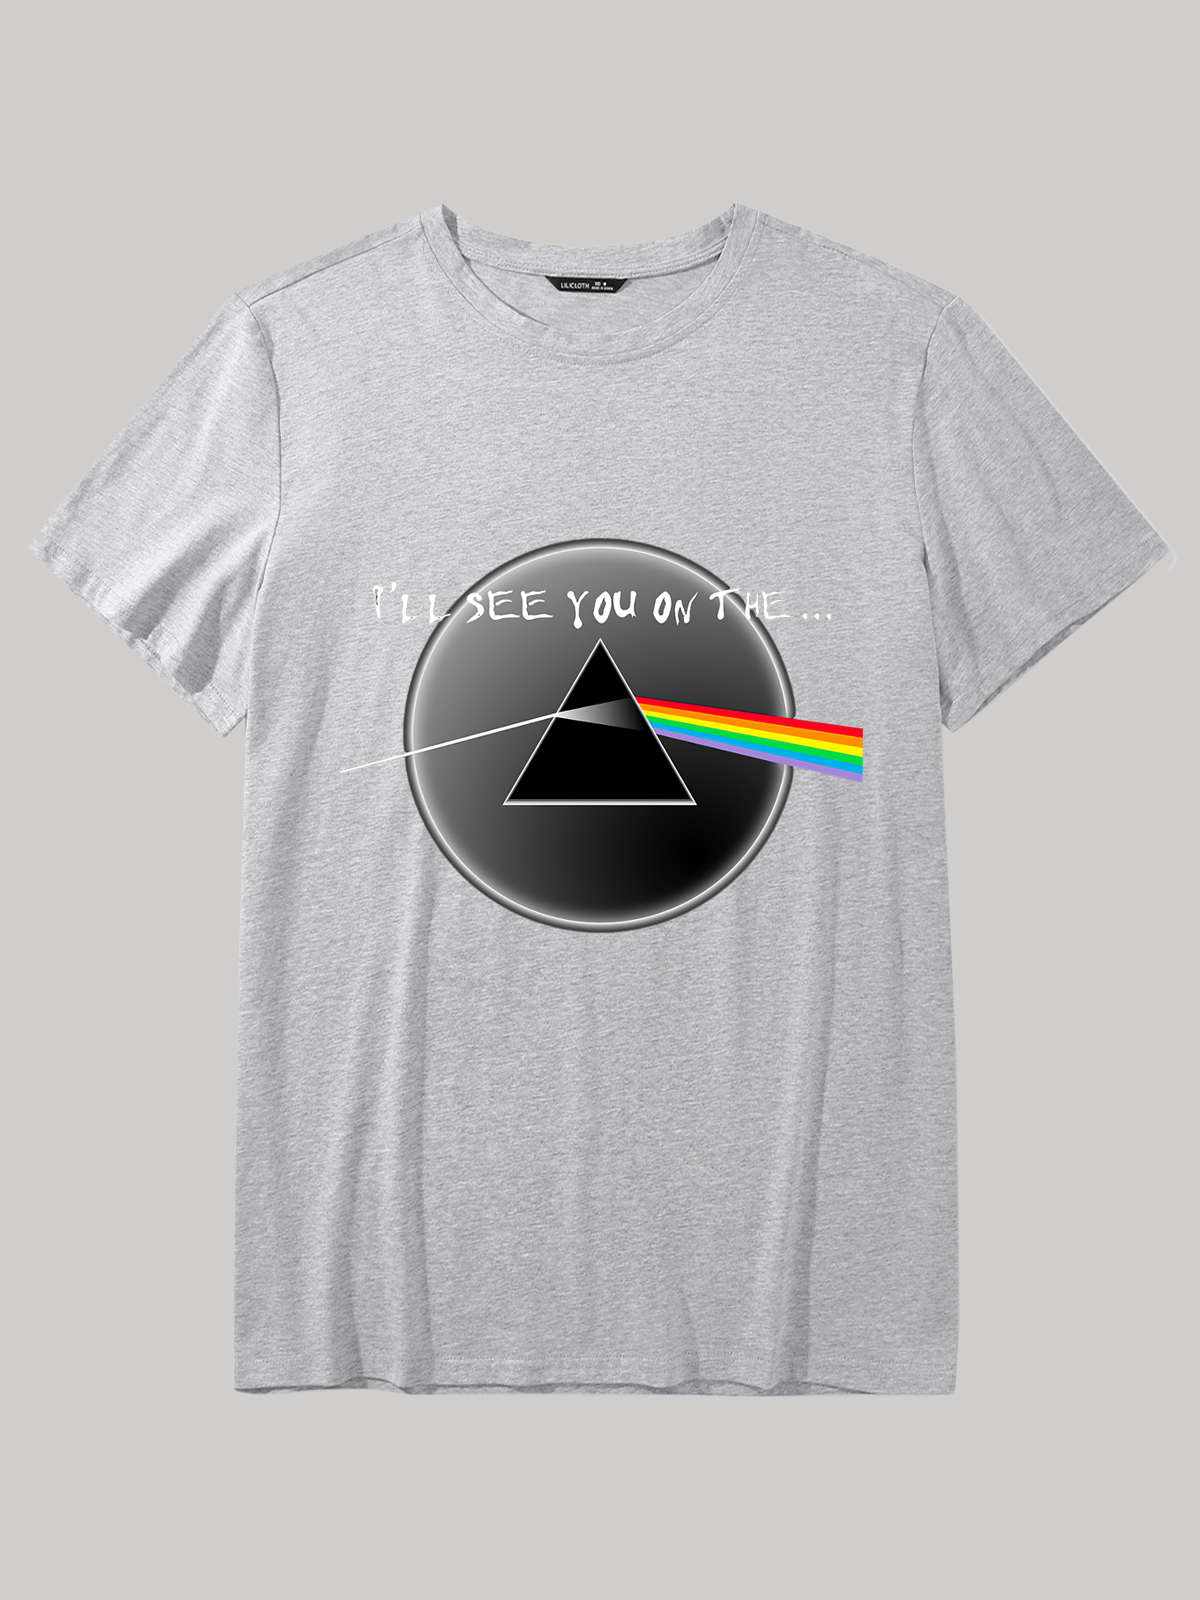 Men's Pink Floyd I'll See You on the Print Casual Color Block Cotton Crew Neck T-Shirt